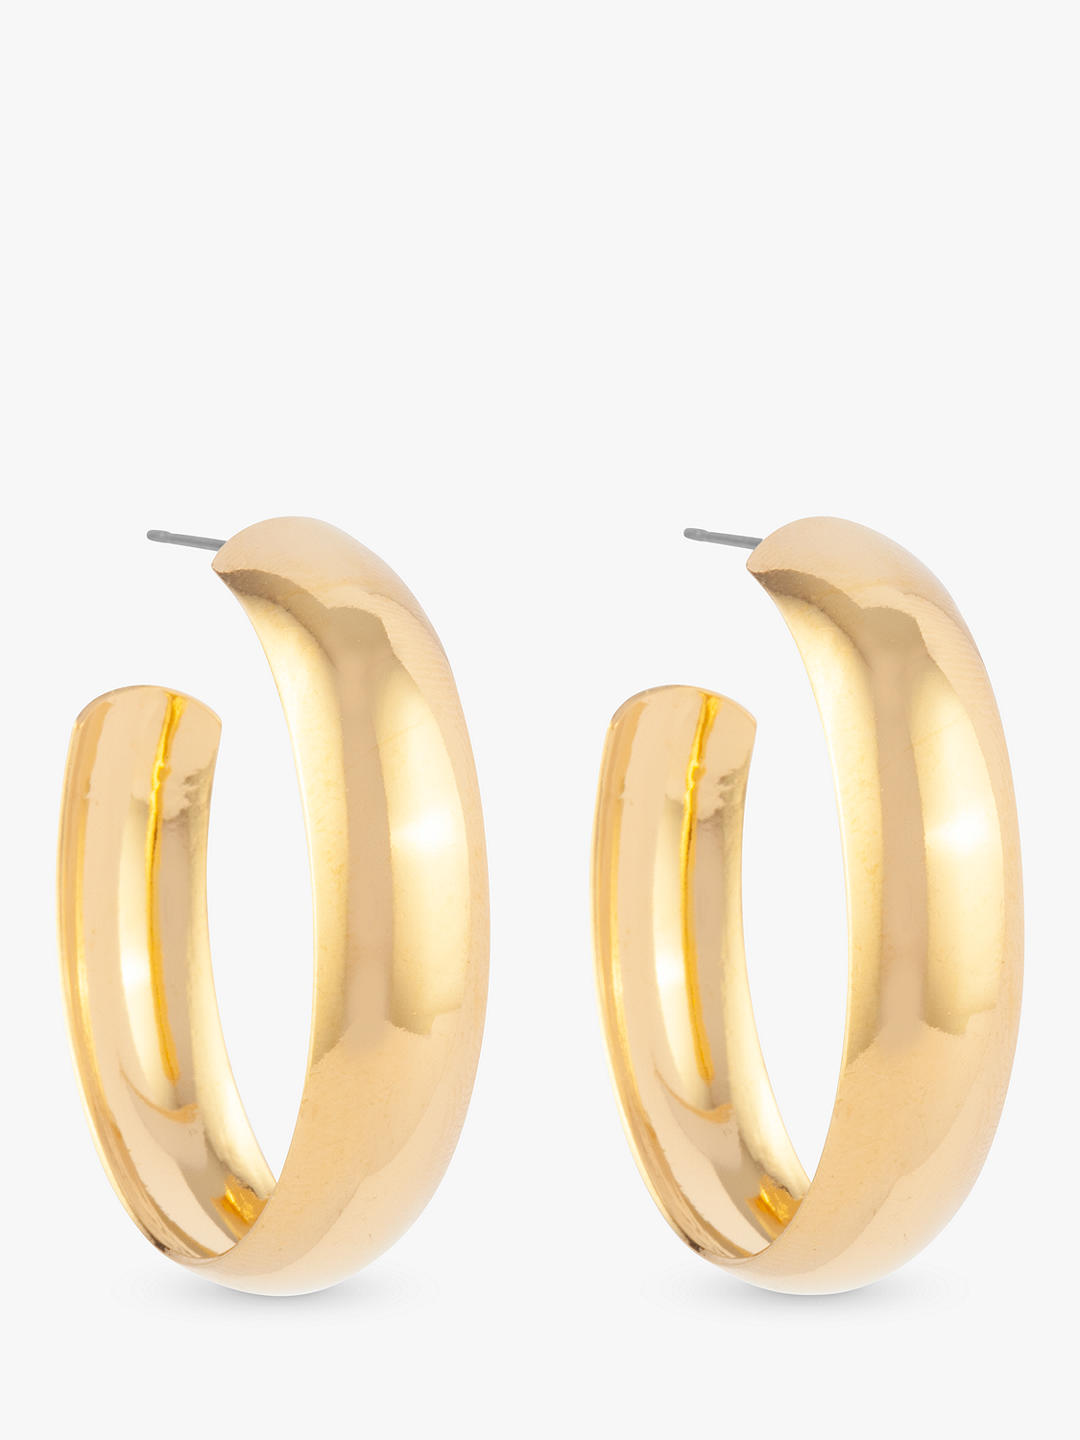 Susan Caplan Vintage Rediscovered Collection Gold Plated Hoop Earrings, Gold